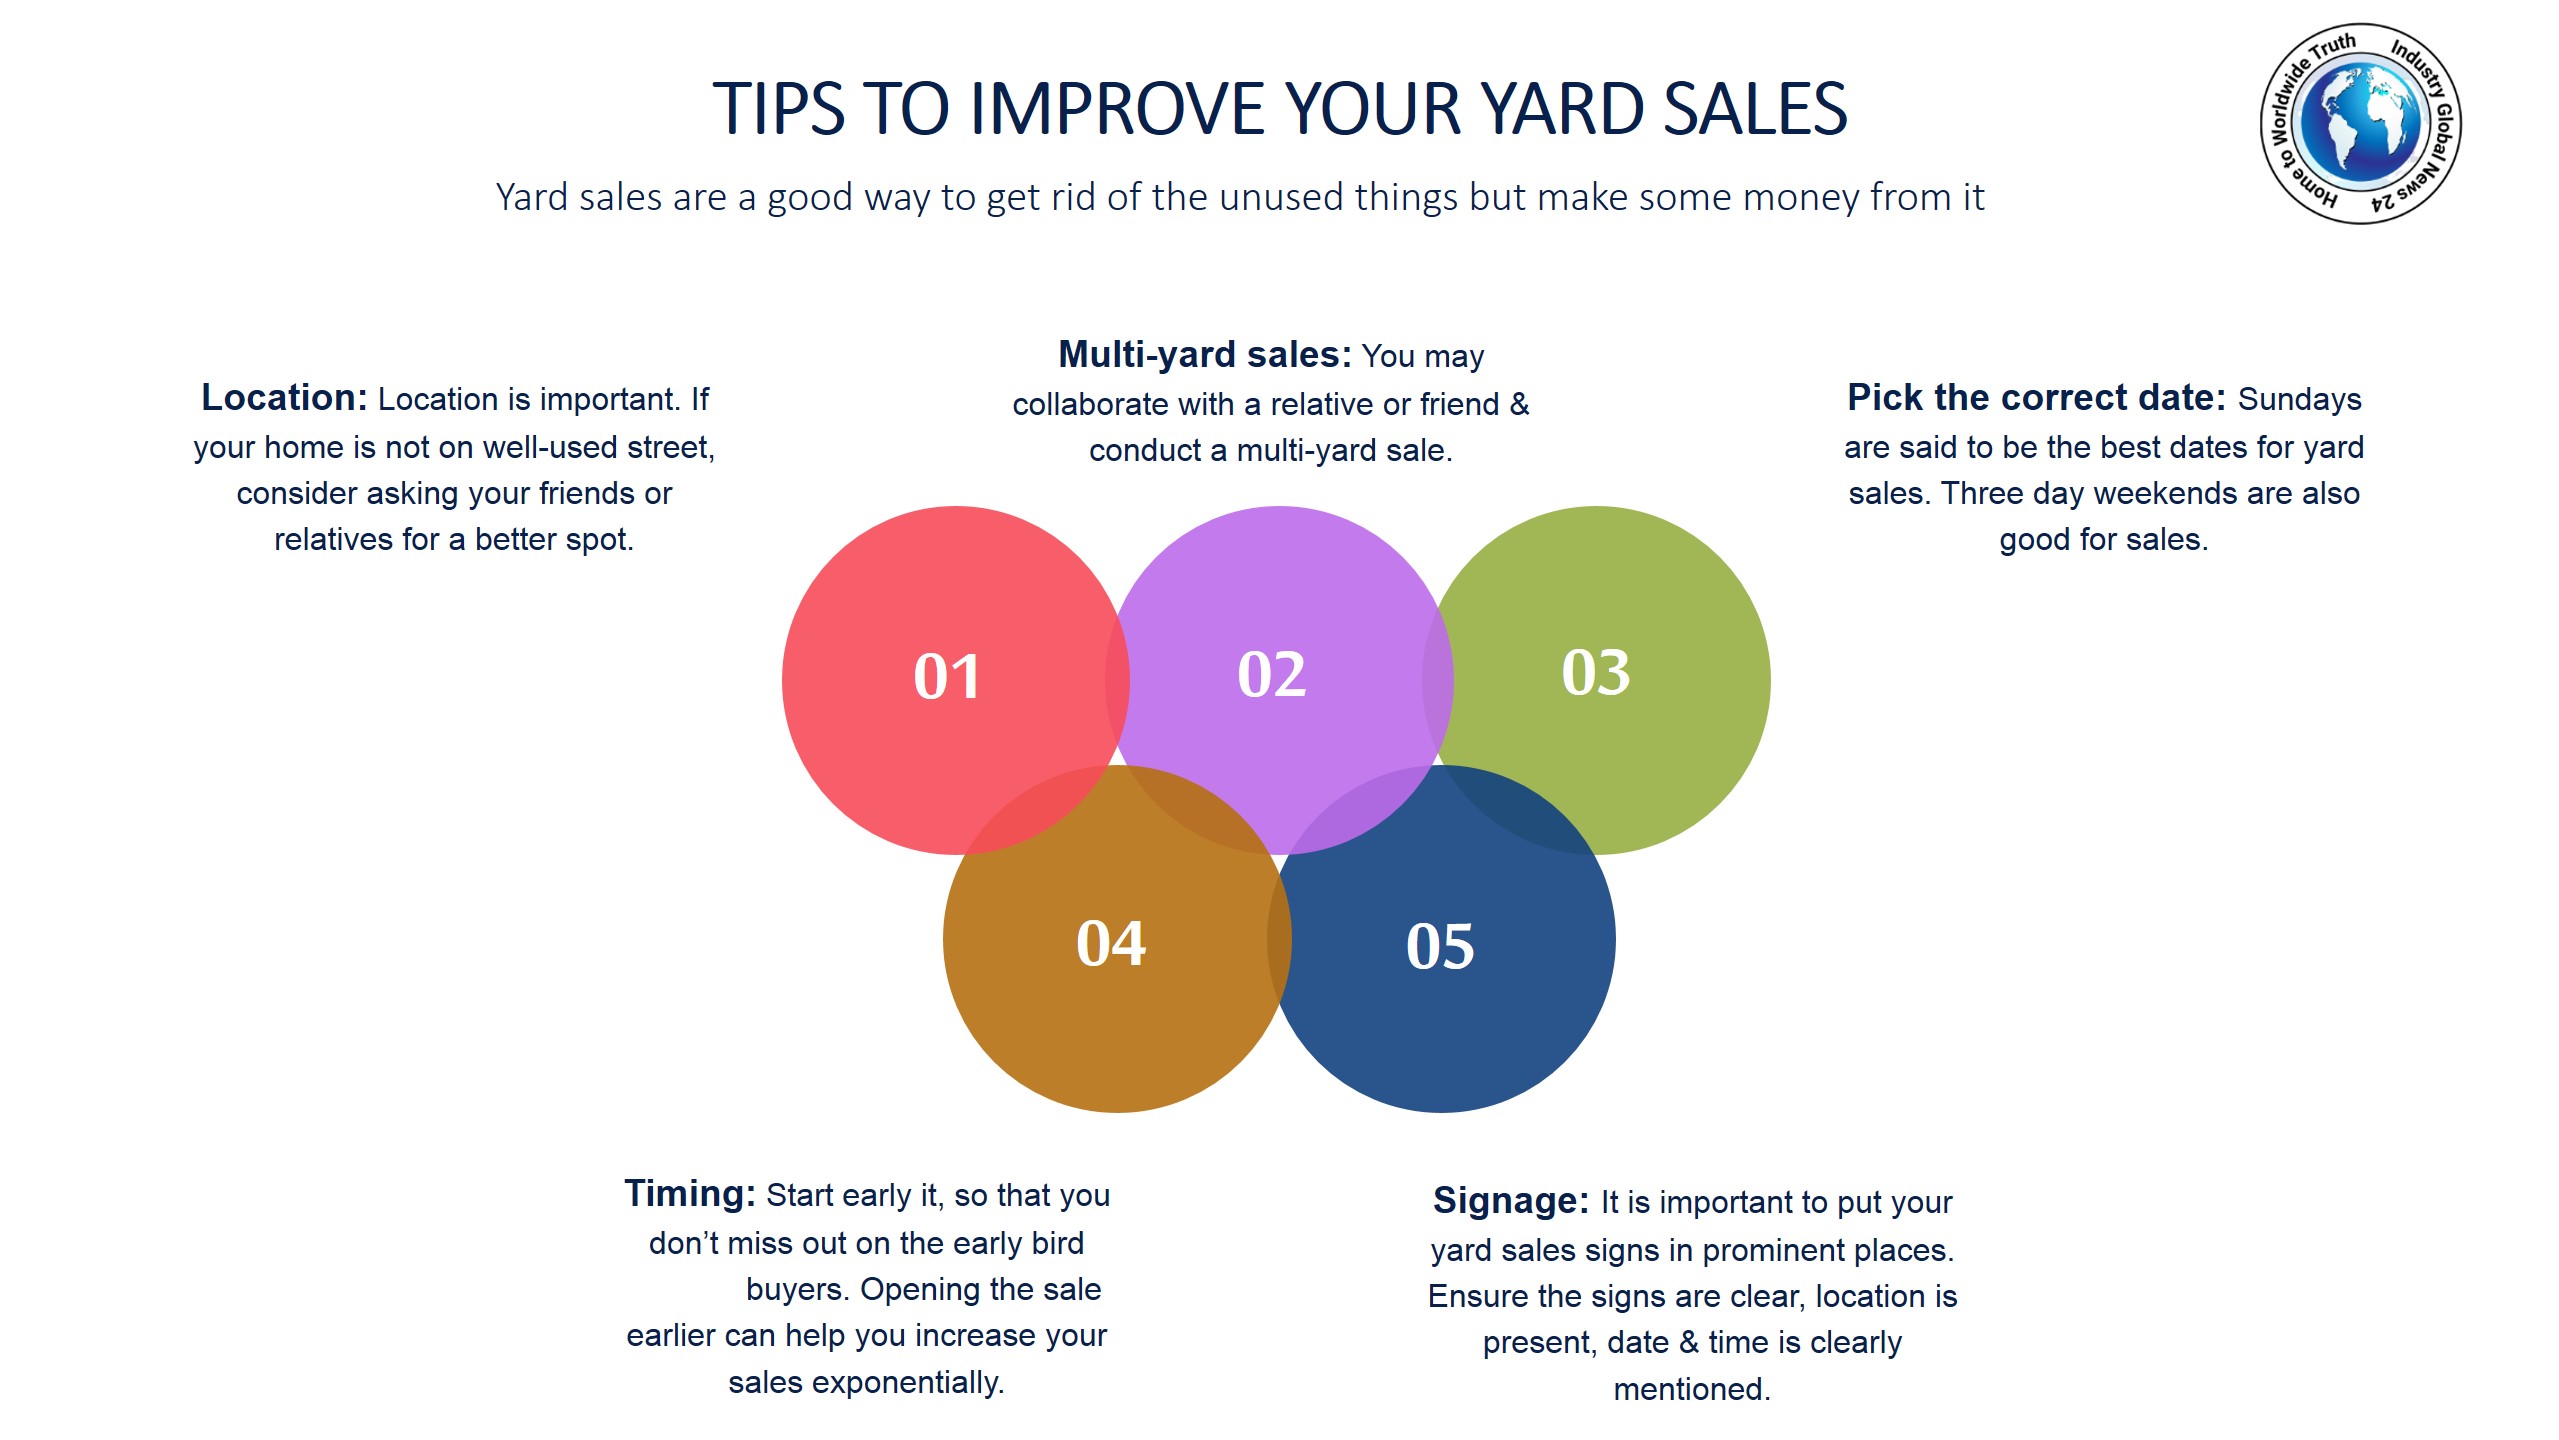 Tips to improve your yard sales